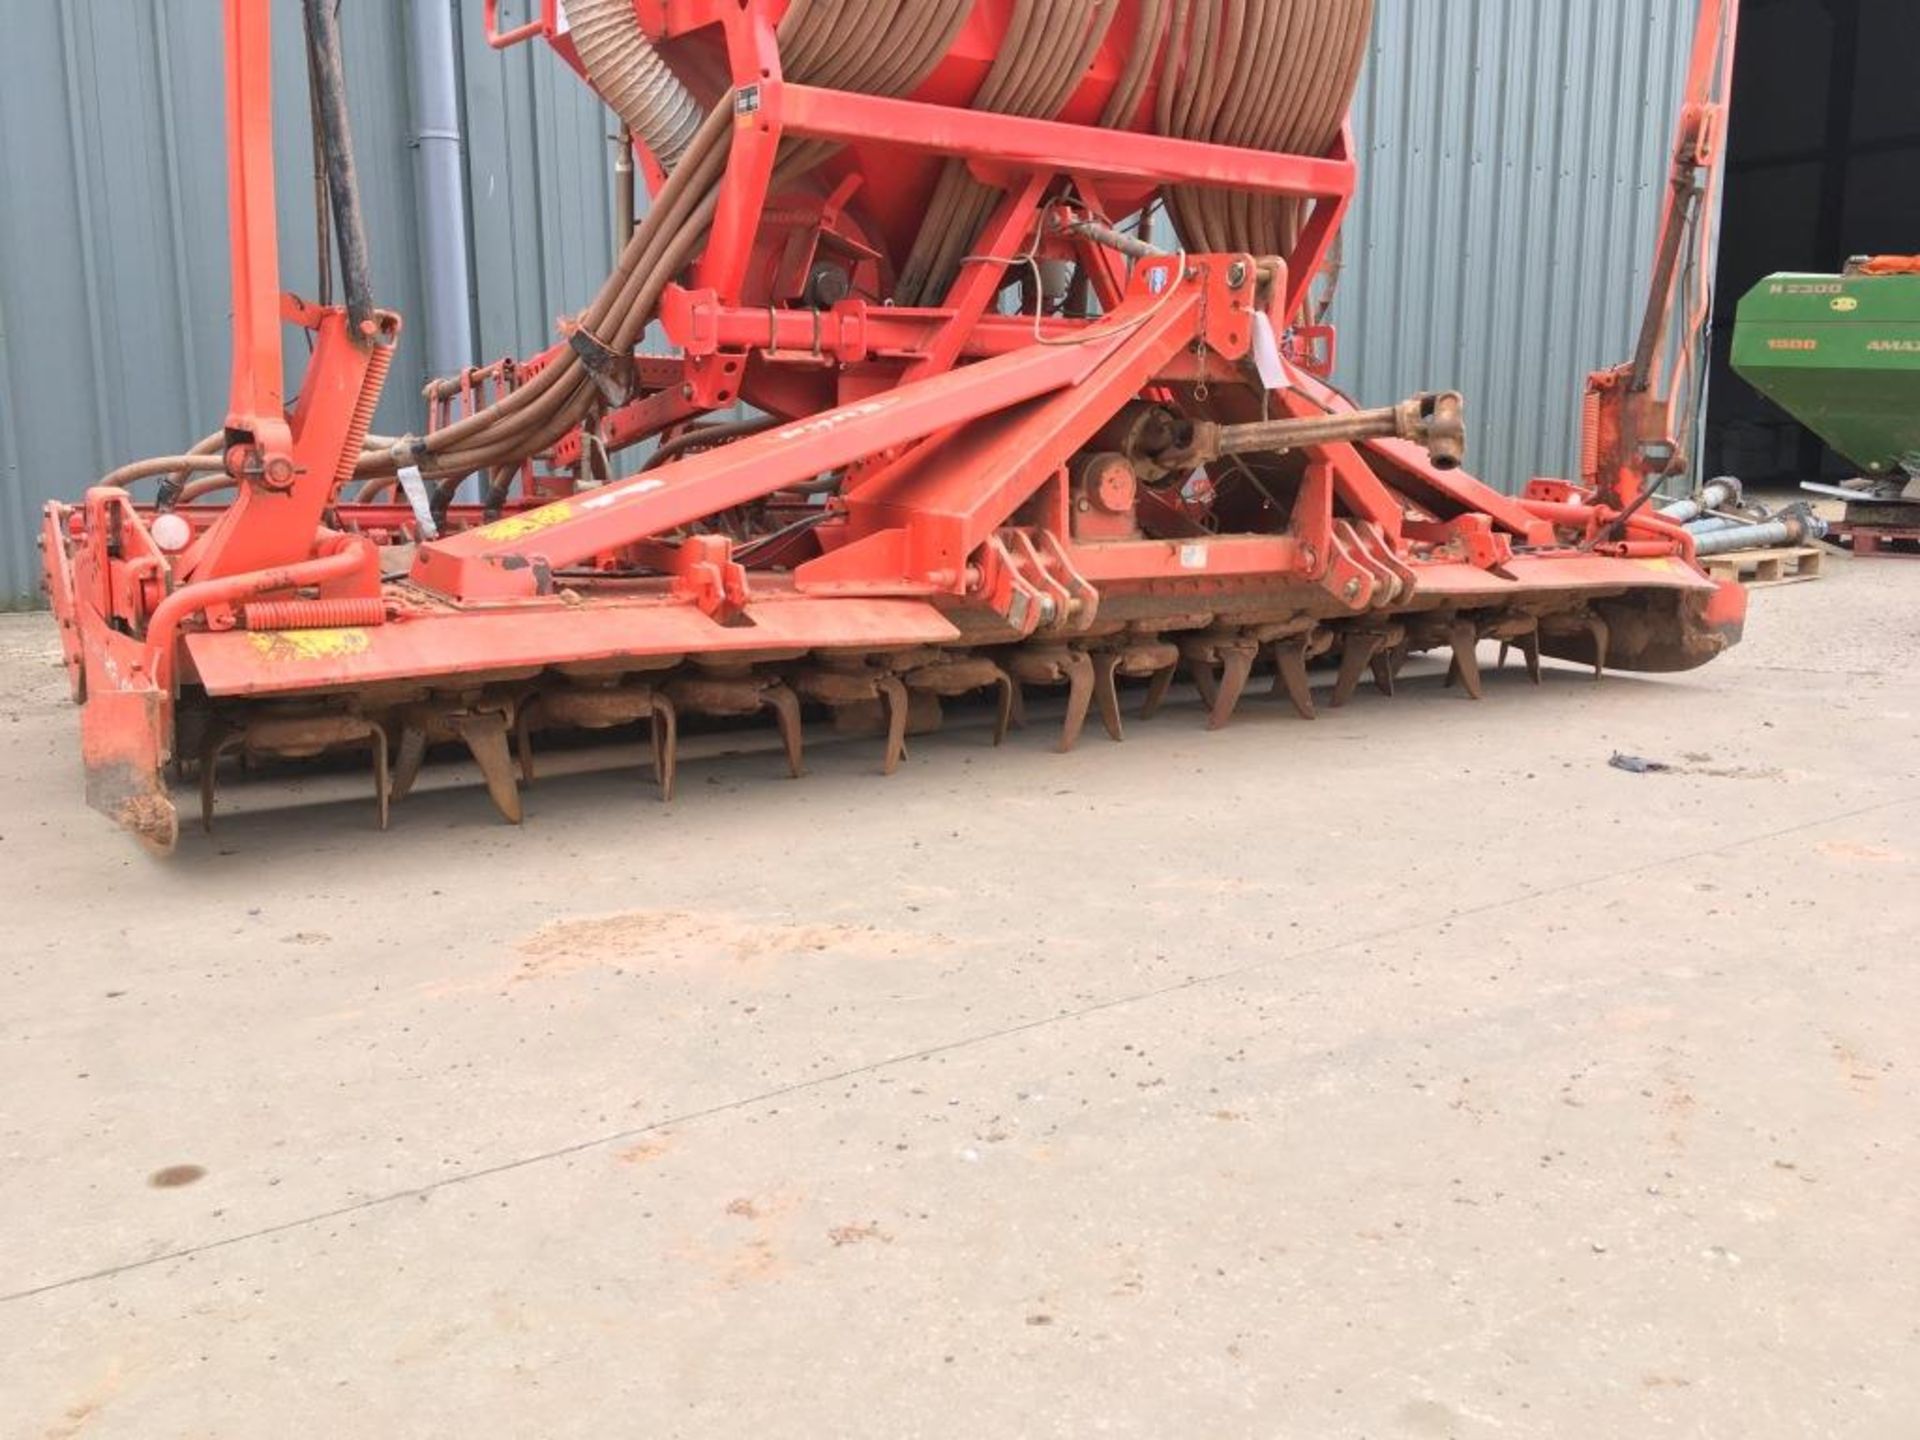 Kuhn HR 4003D 14' power harrow, serial number: A4631 (2002) with Kuhn Venta LC 402 seed drill, - Bild 5 aus 15